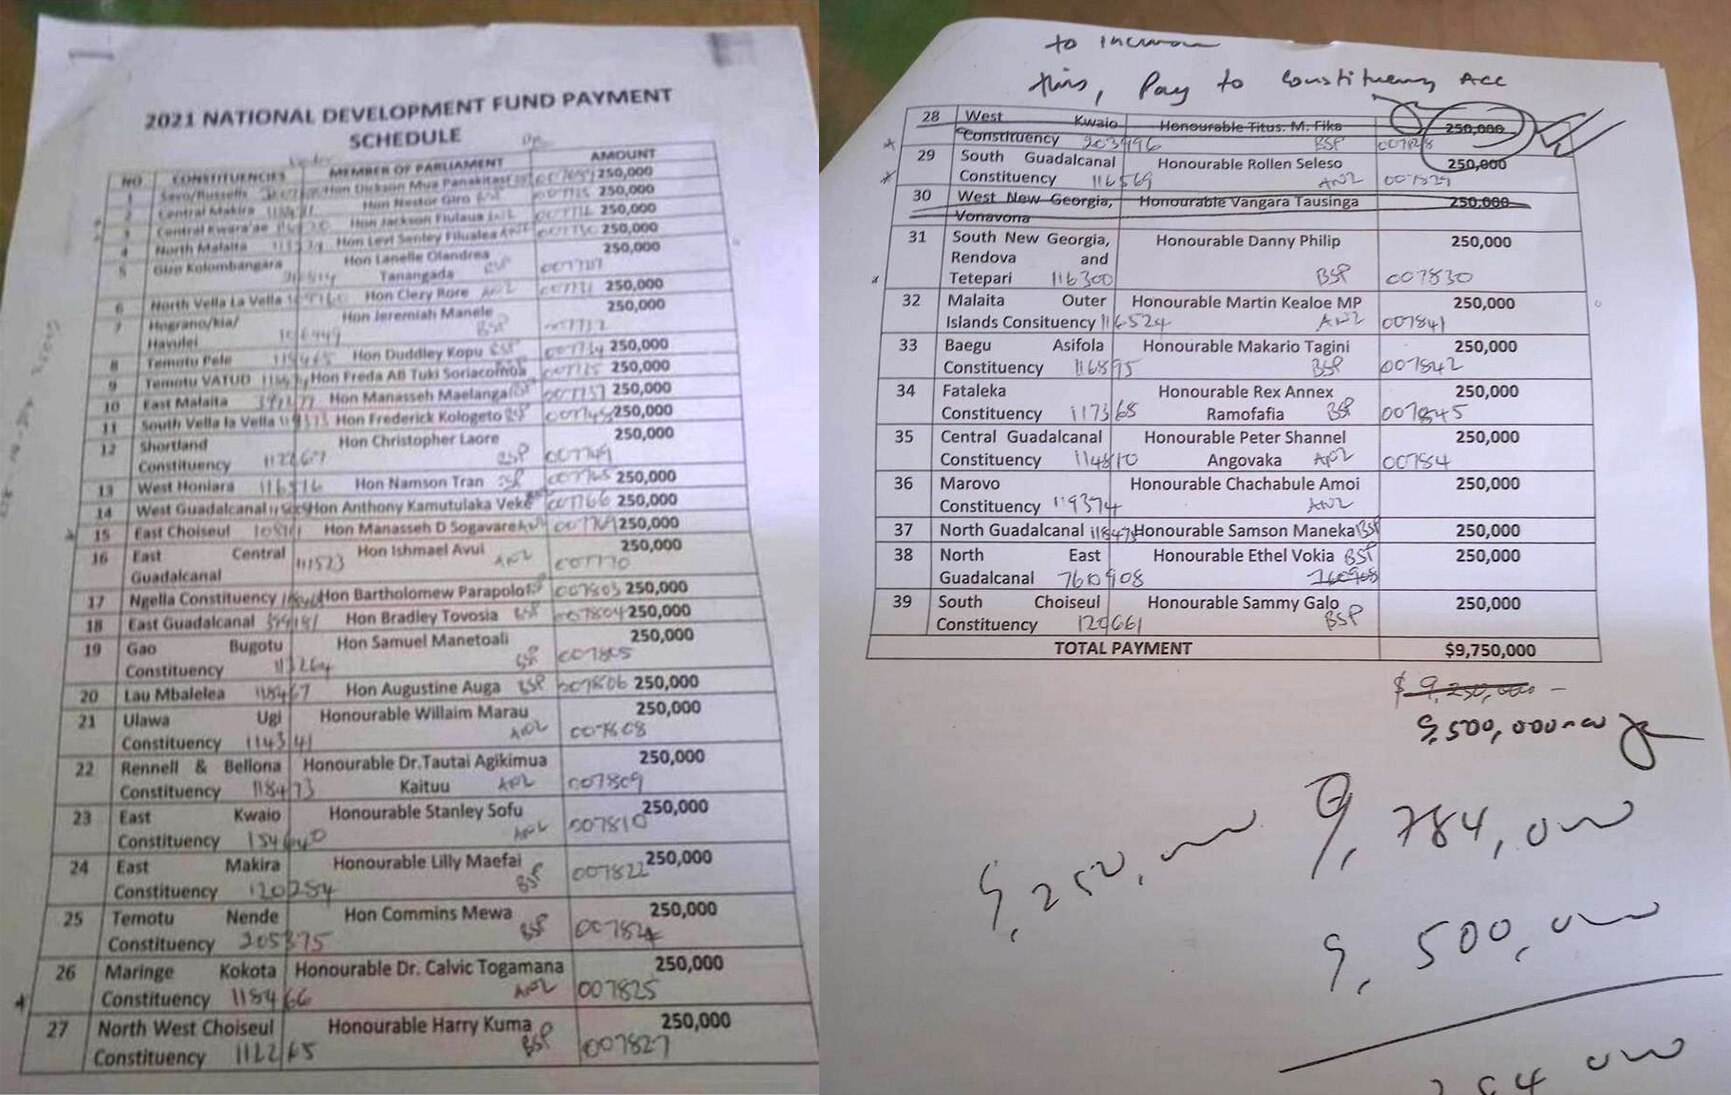 Two pages printed with a list of 39 names, their constituencies, and a dollar amount. Two names have been crossed out.